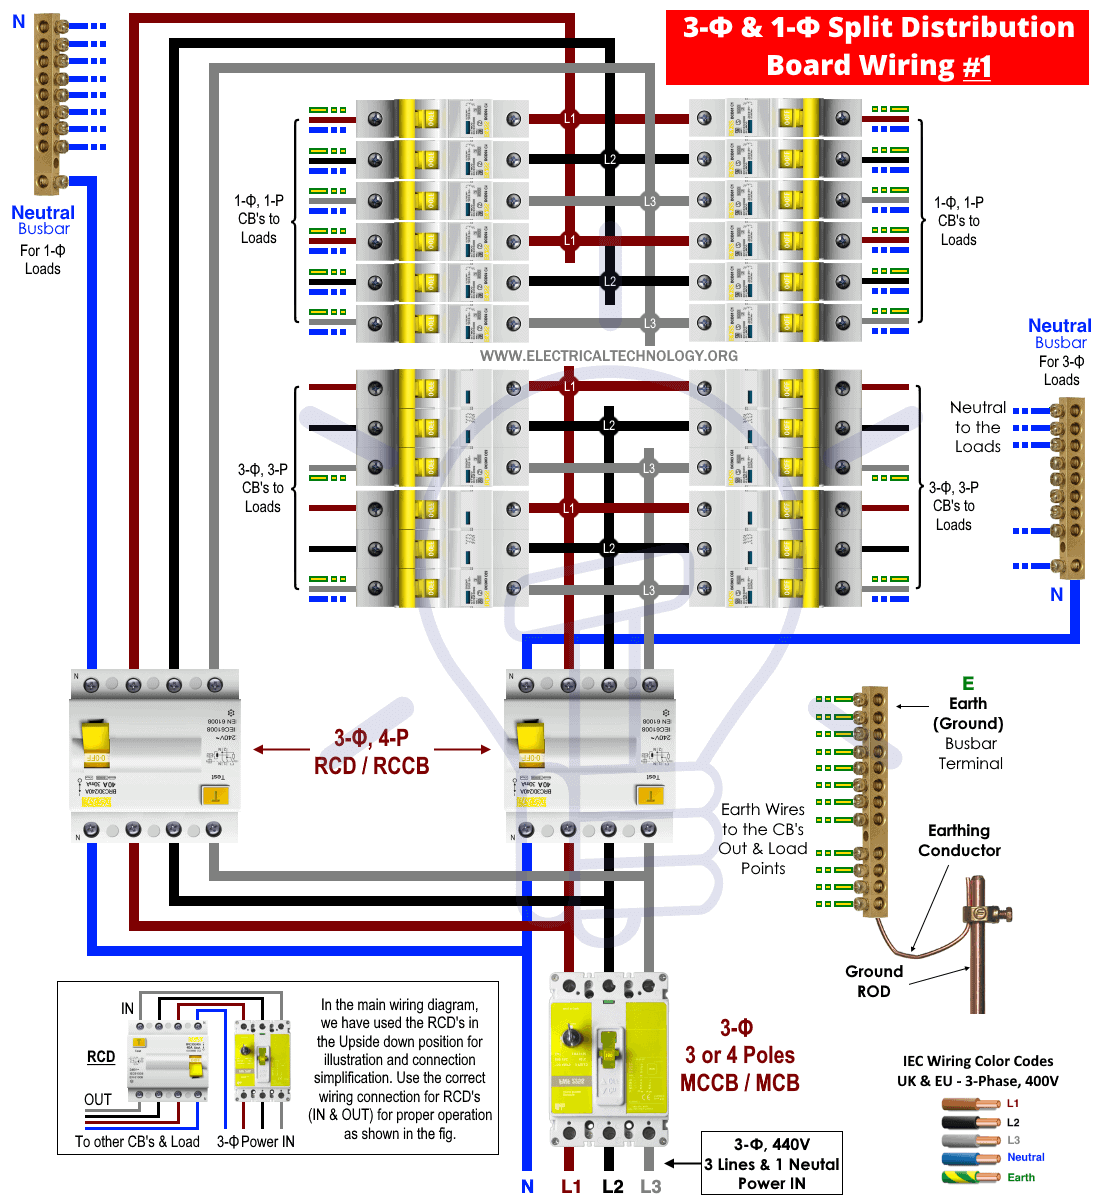 How to Wire 1-Phase & 3-Phase Split Load Distribution Board?  3 Phase Consumer Unit Wiring Diagram    Electrical Technology